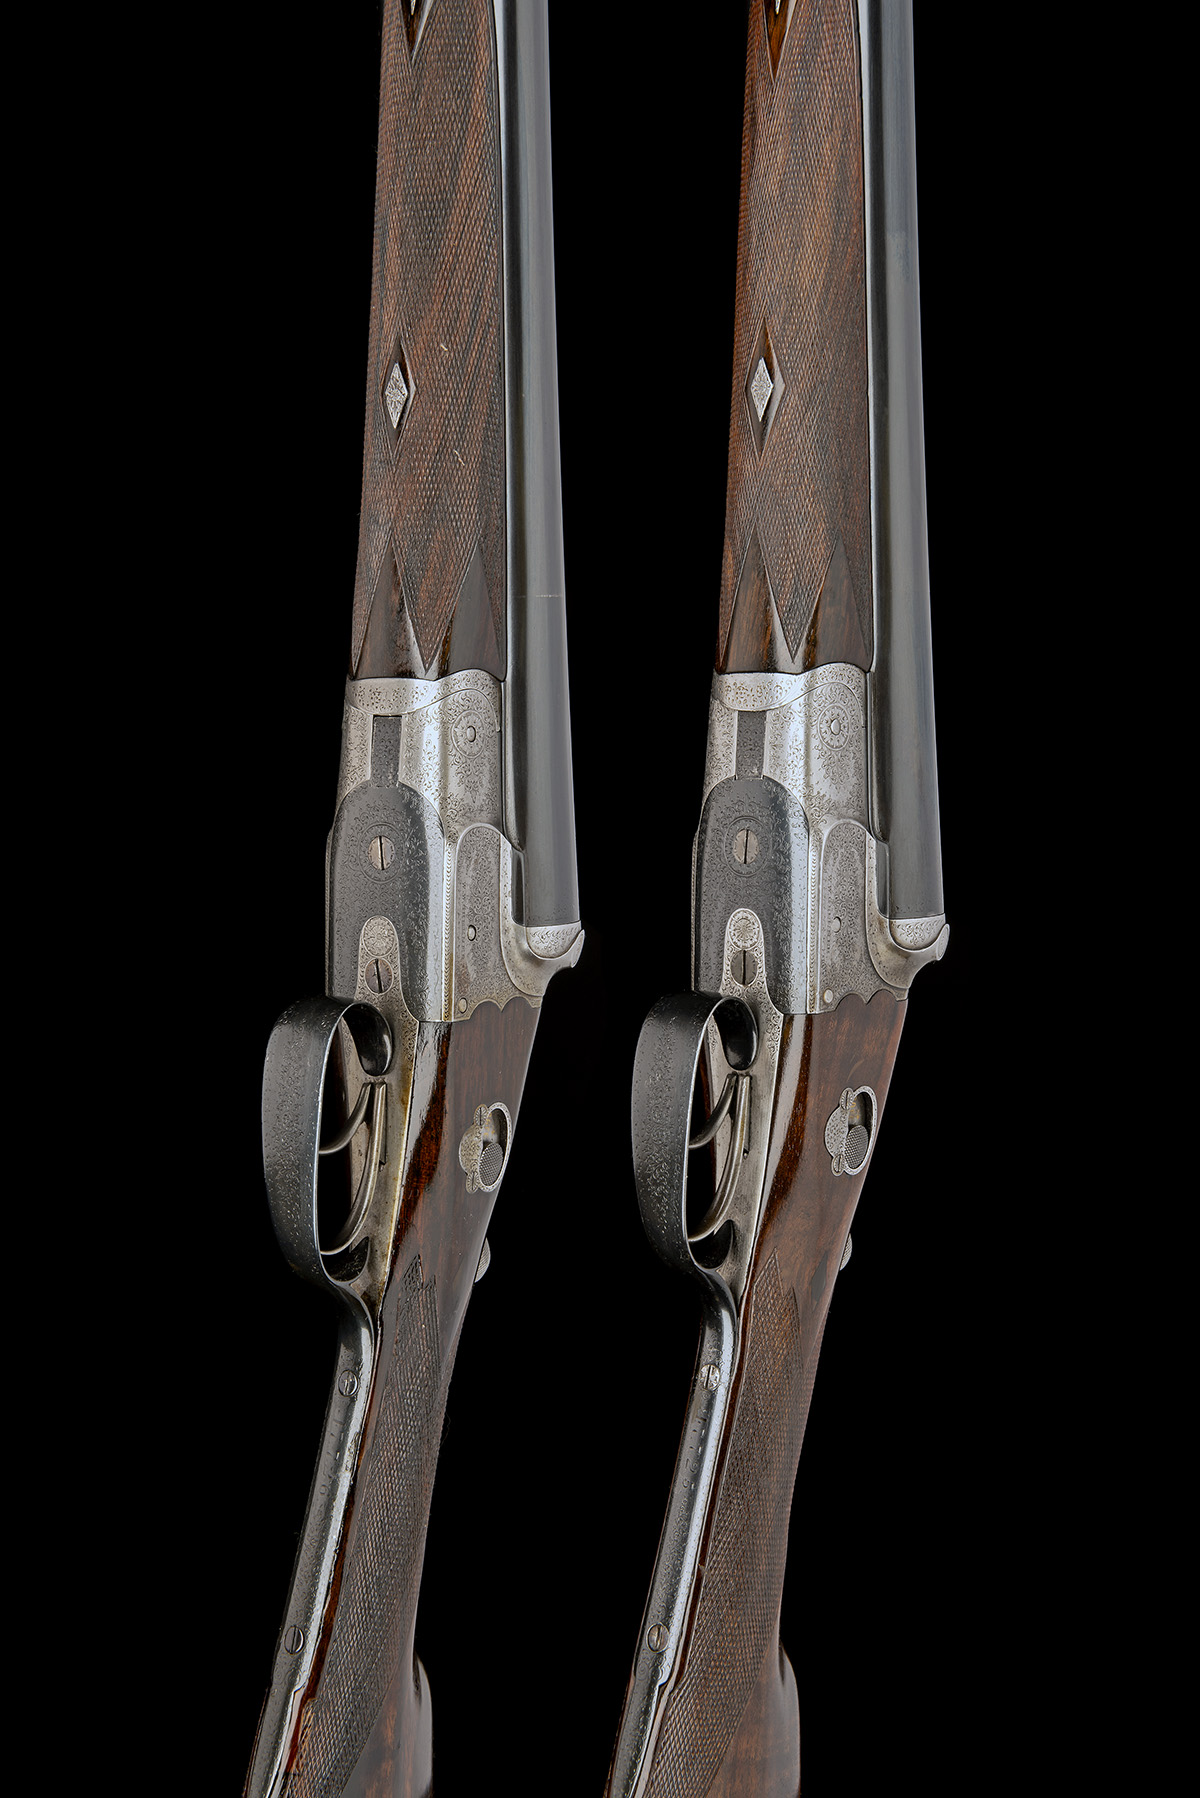 W.W. GREENER A PAIR OF 12-BORE 'G3 MONARCH' BOXLOCK EJECTORS, serial no. 47725 / 6, 28in. sleeved - Image 3 of 9